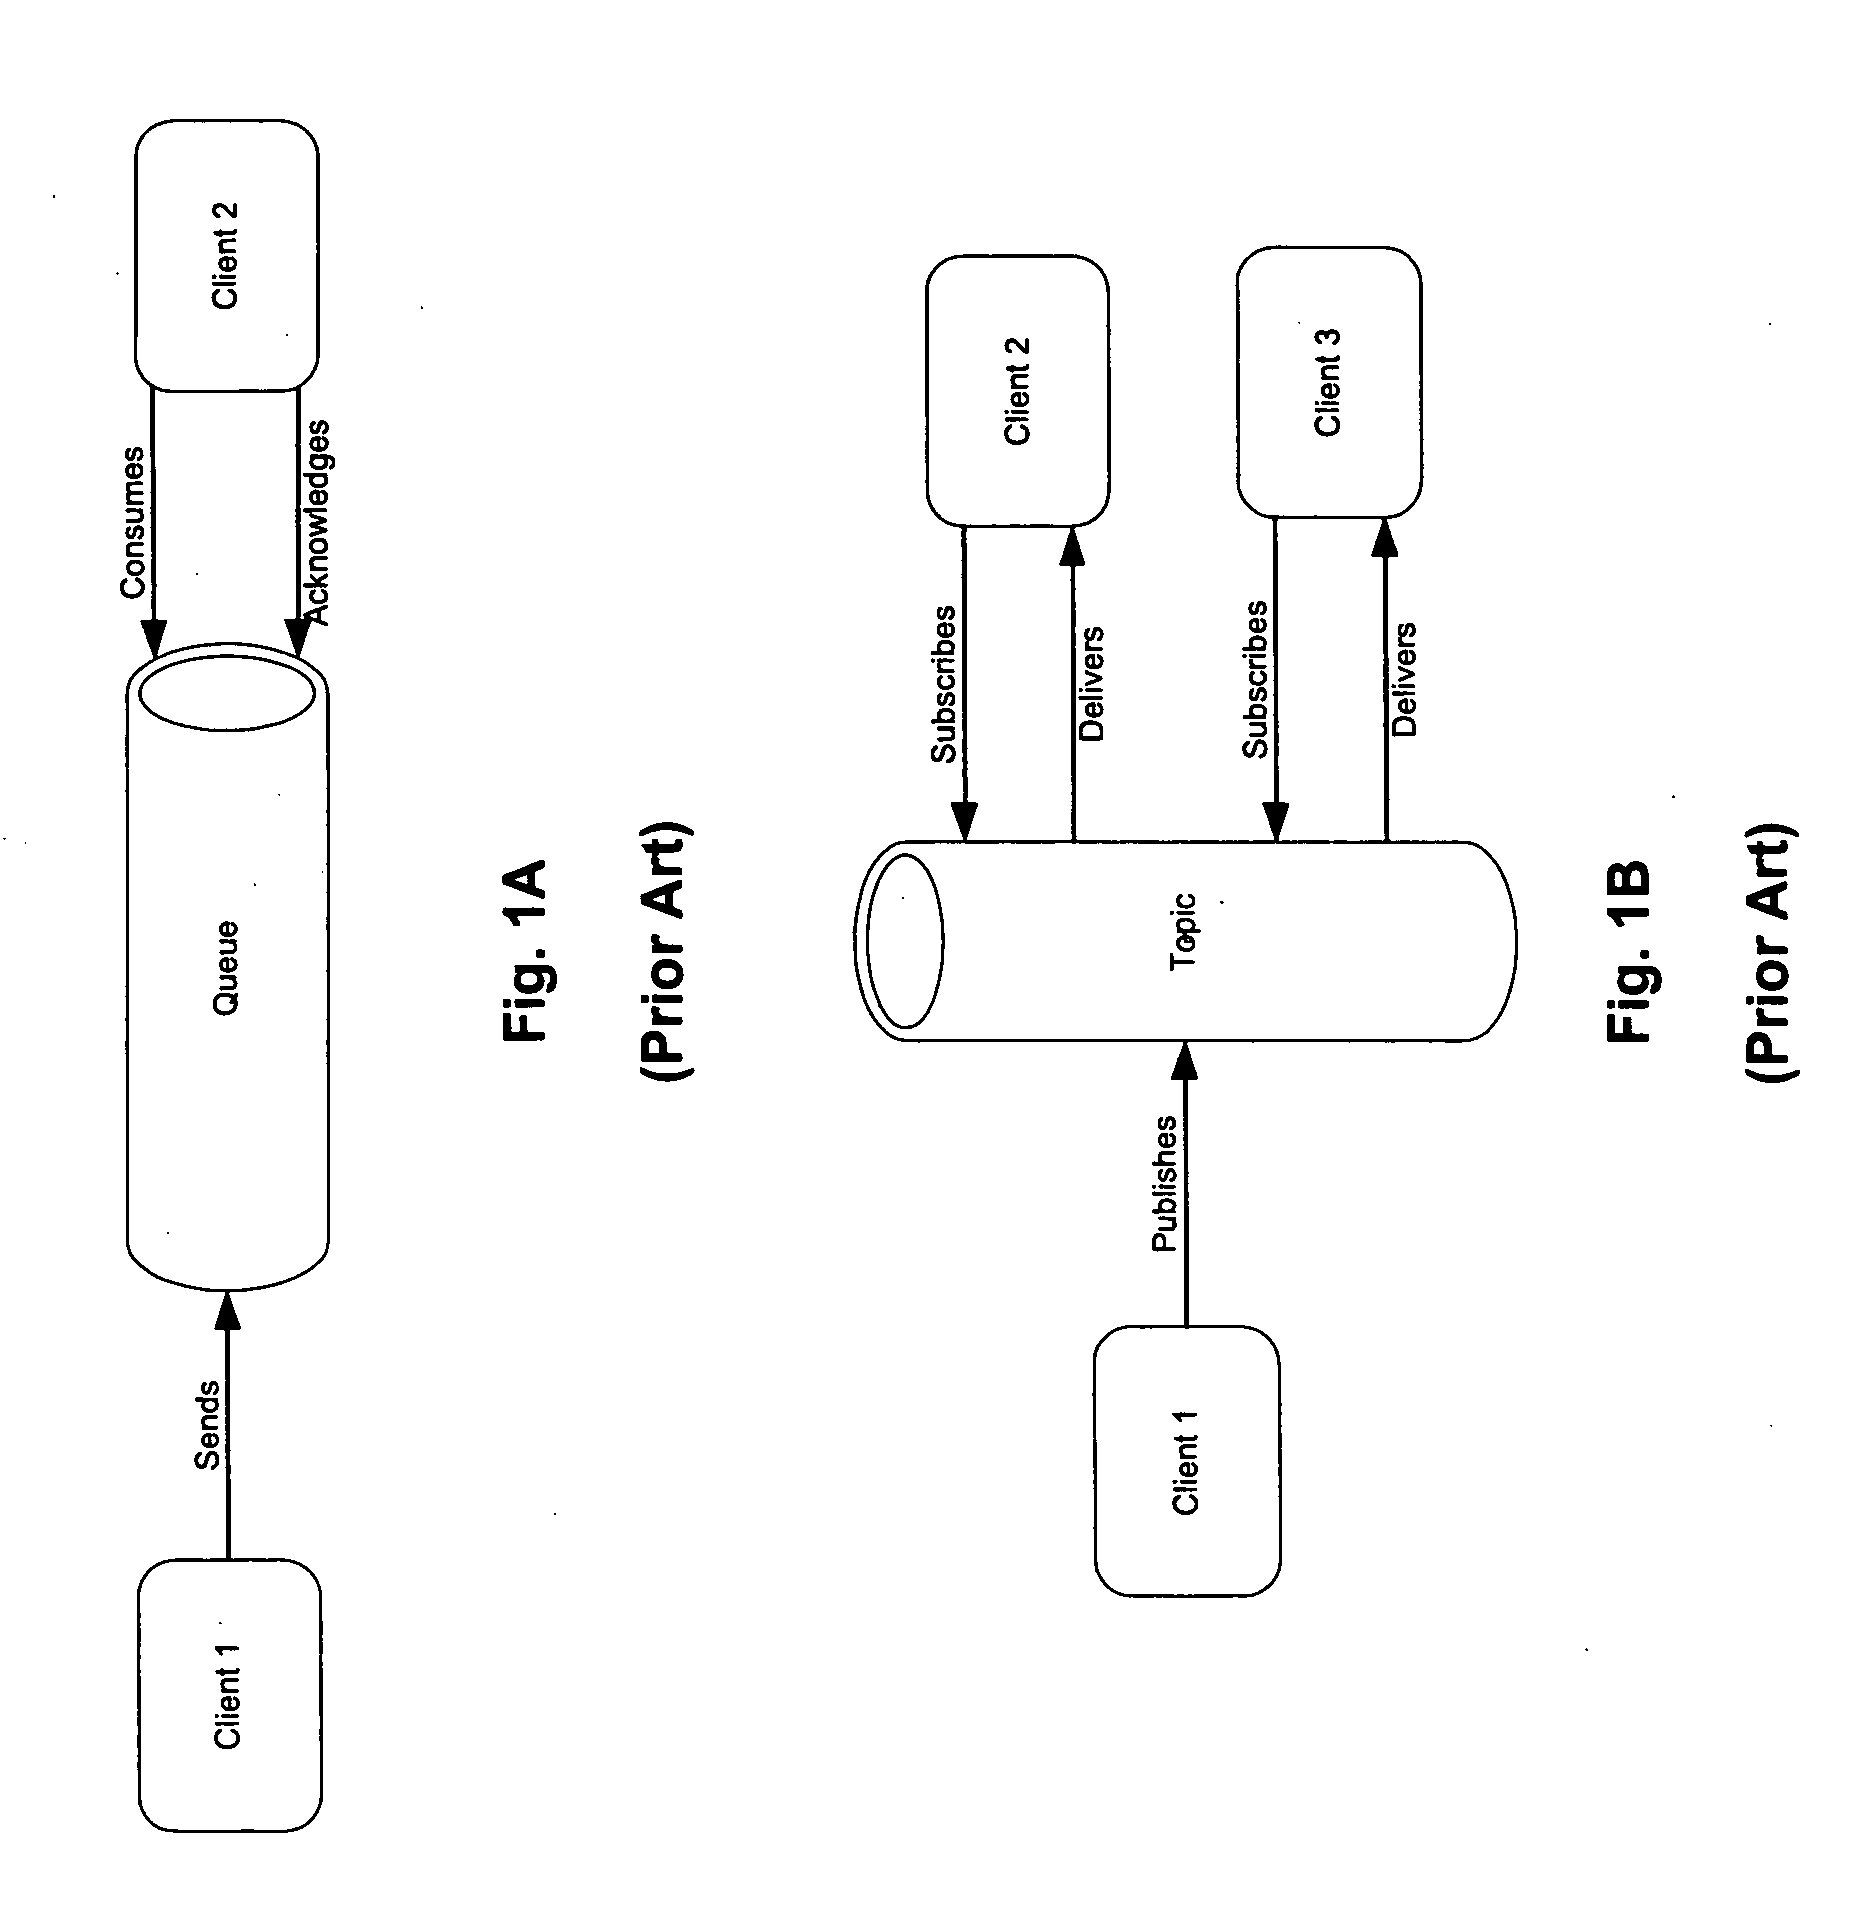 Delivering messages in an enterprise messaging system using message selector hierarchy